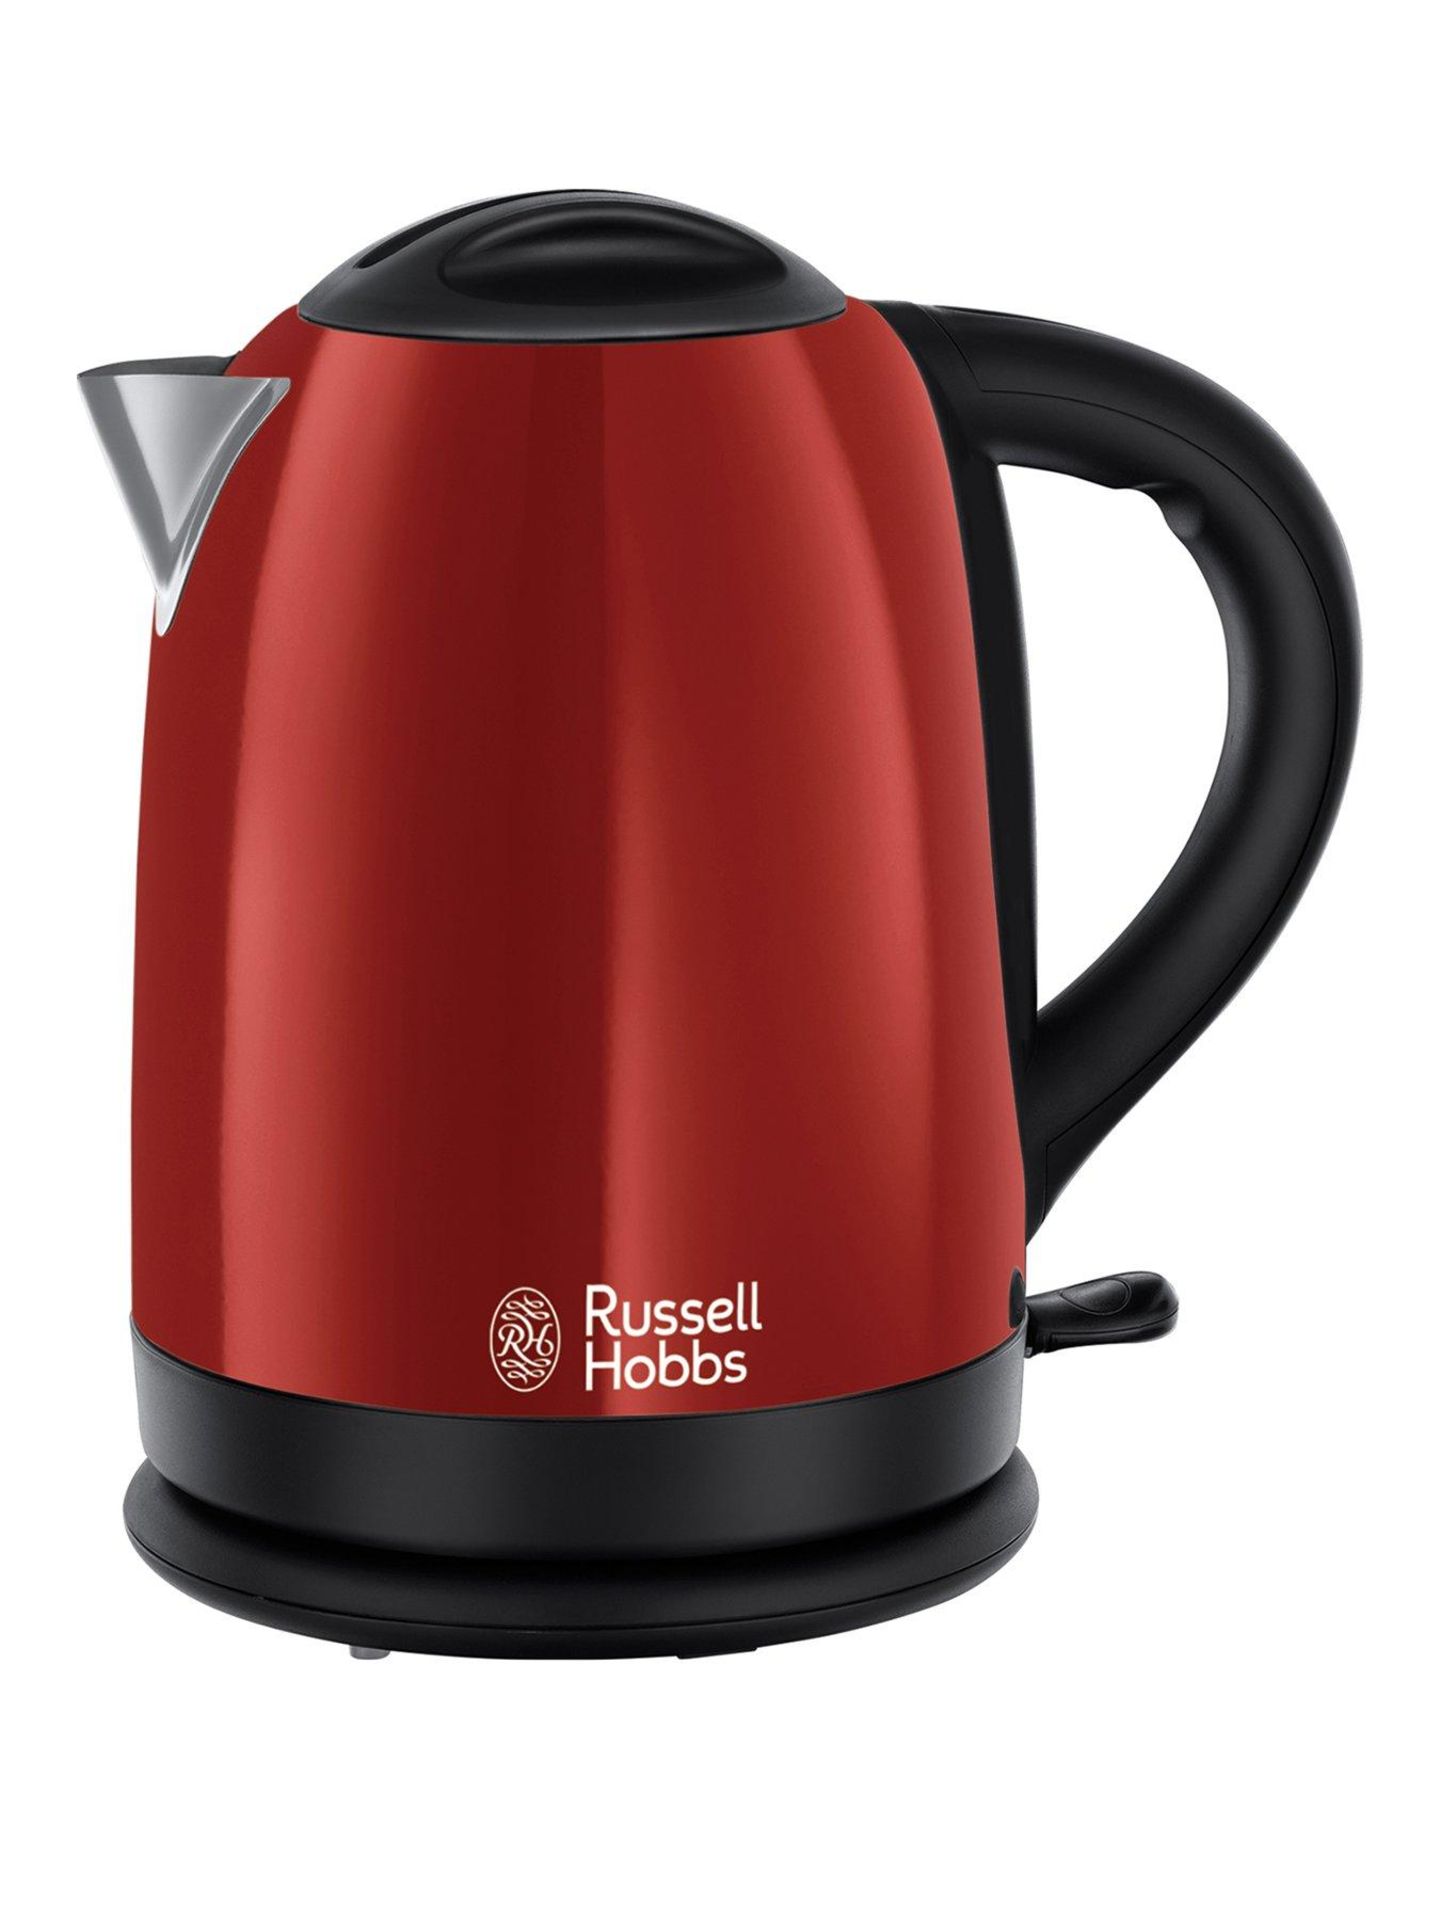 V Brand New Russel Hobbs Red Dorchester Kettle - Perfect Pour - Saves Up To 70% Energy - Littlewoods - Image 2 of 10